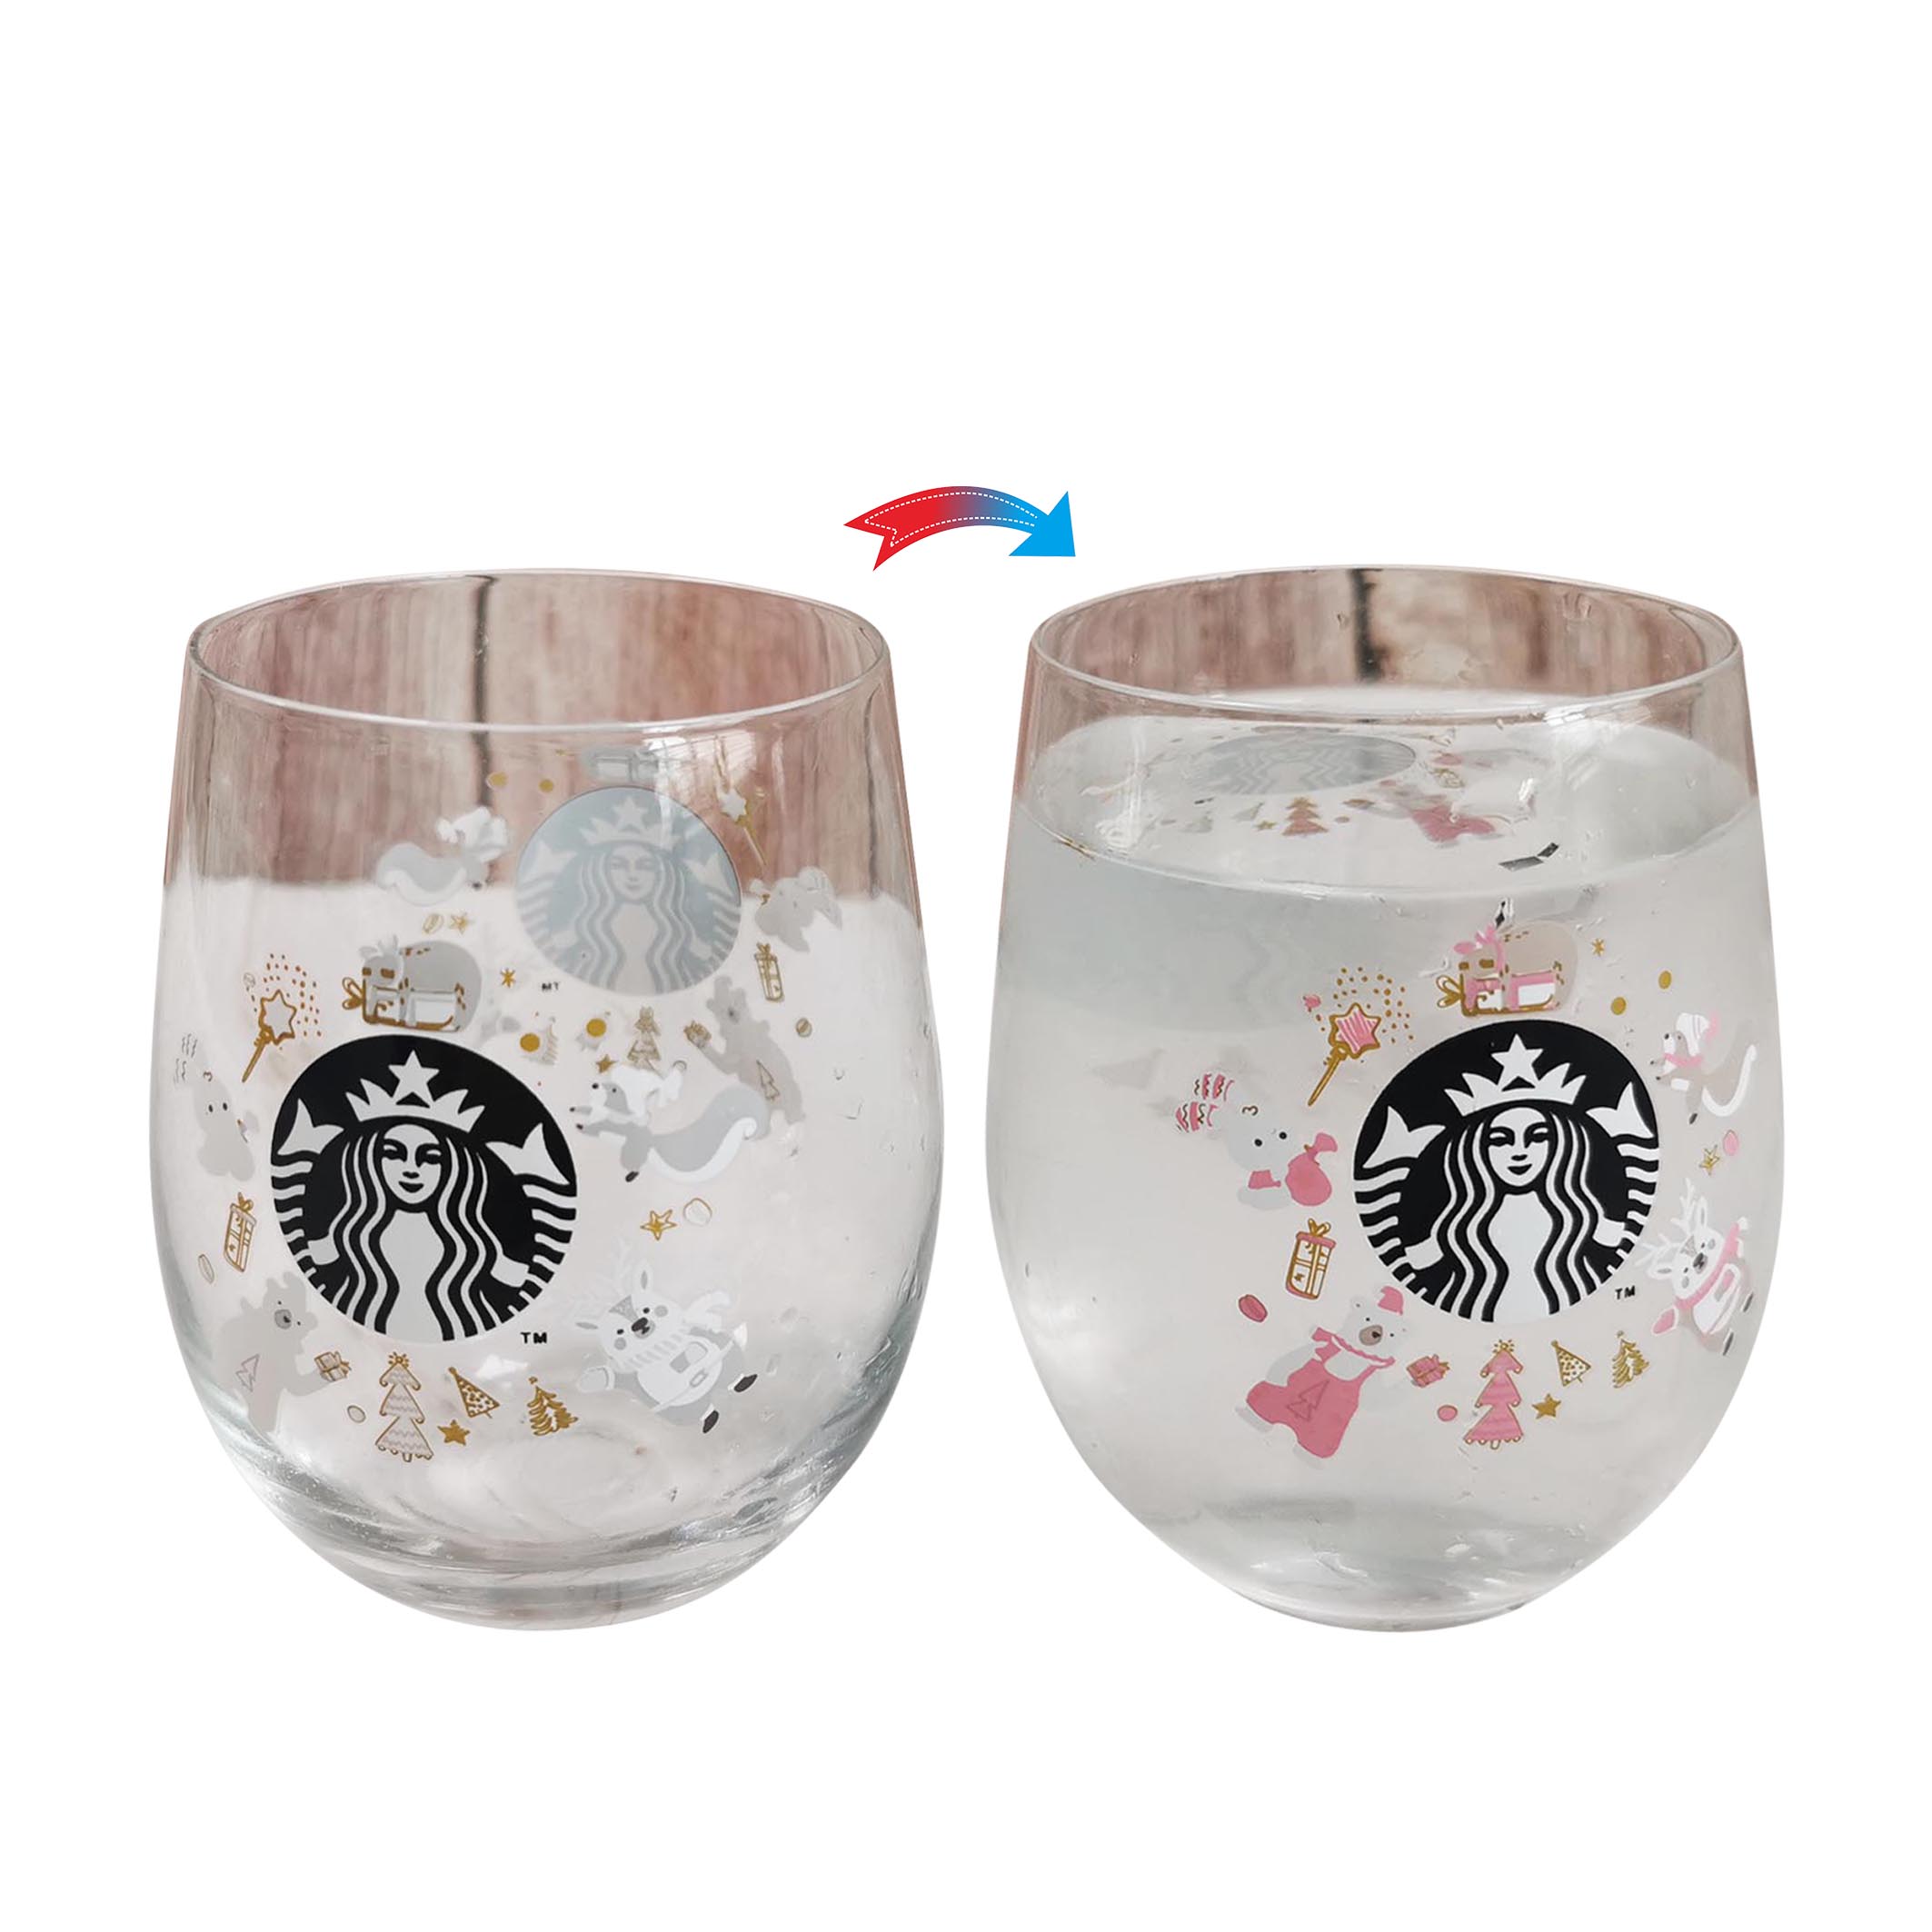 Starbucks color changing glass